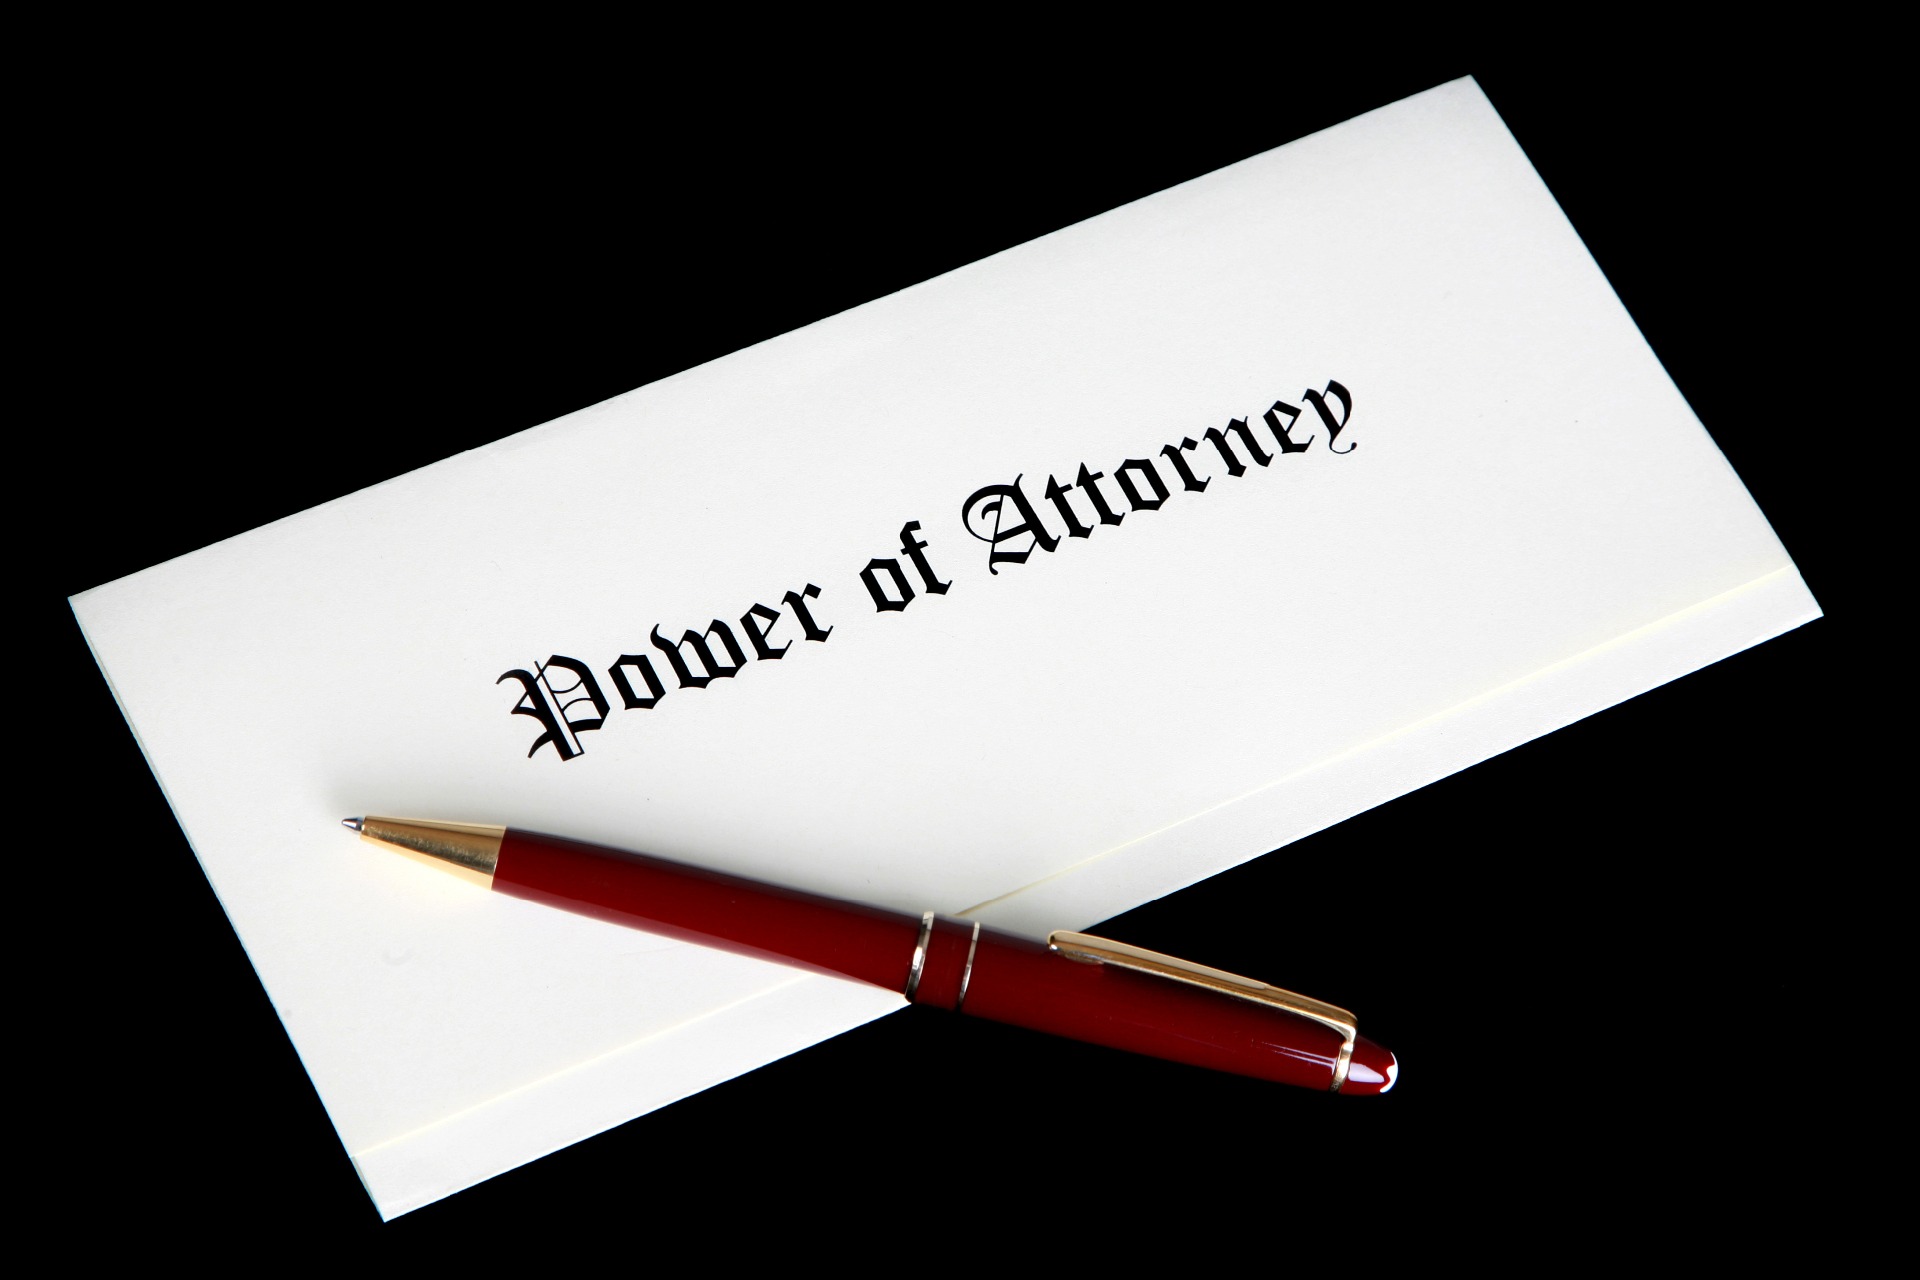 A piece of paper folded into three, with Power of Attorney written on, with a red pen resting on the document.